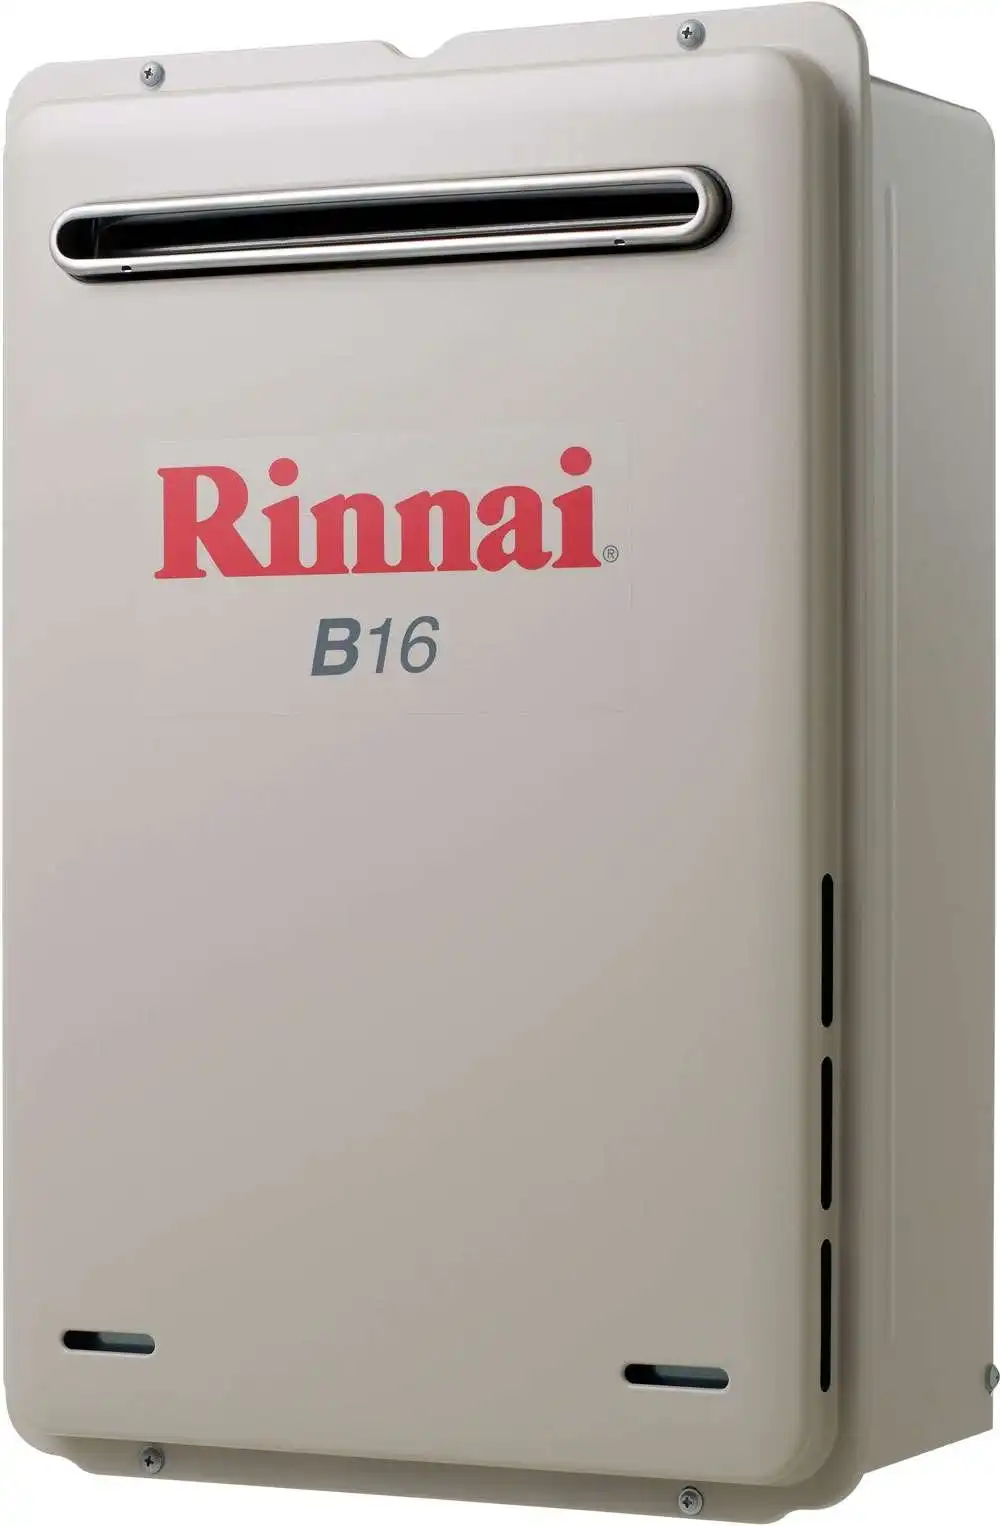 Rinnai Builders 50oC 16L Instant Hot Water System B16N50A B16 *NATURAL GAS*